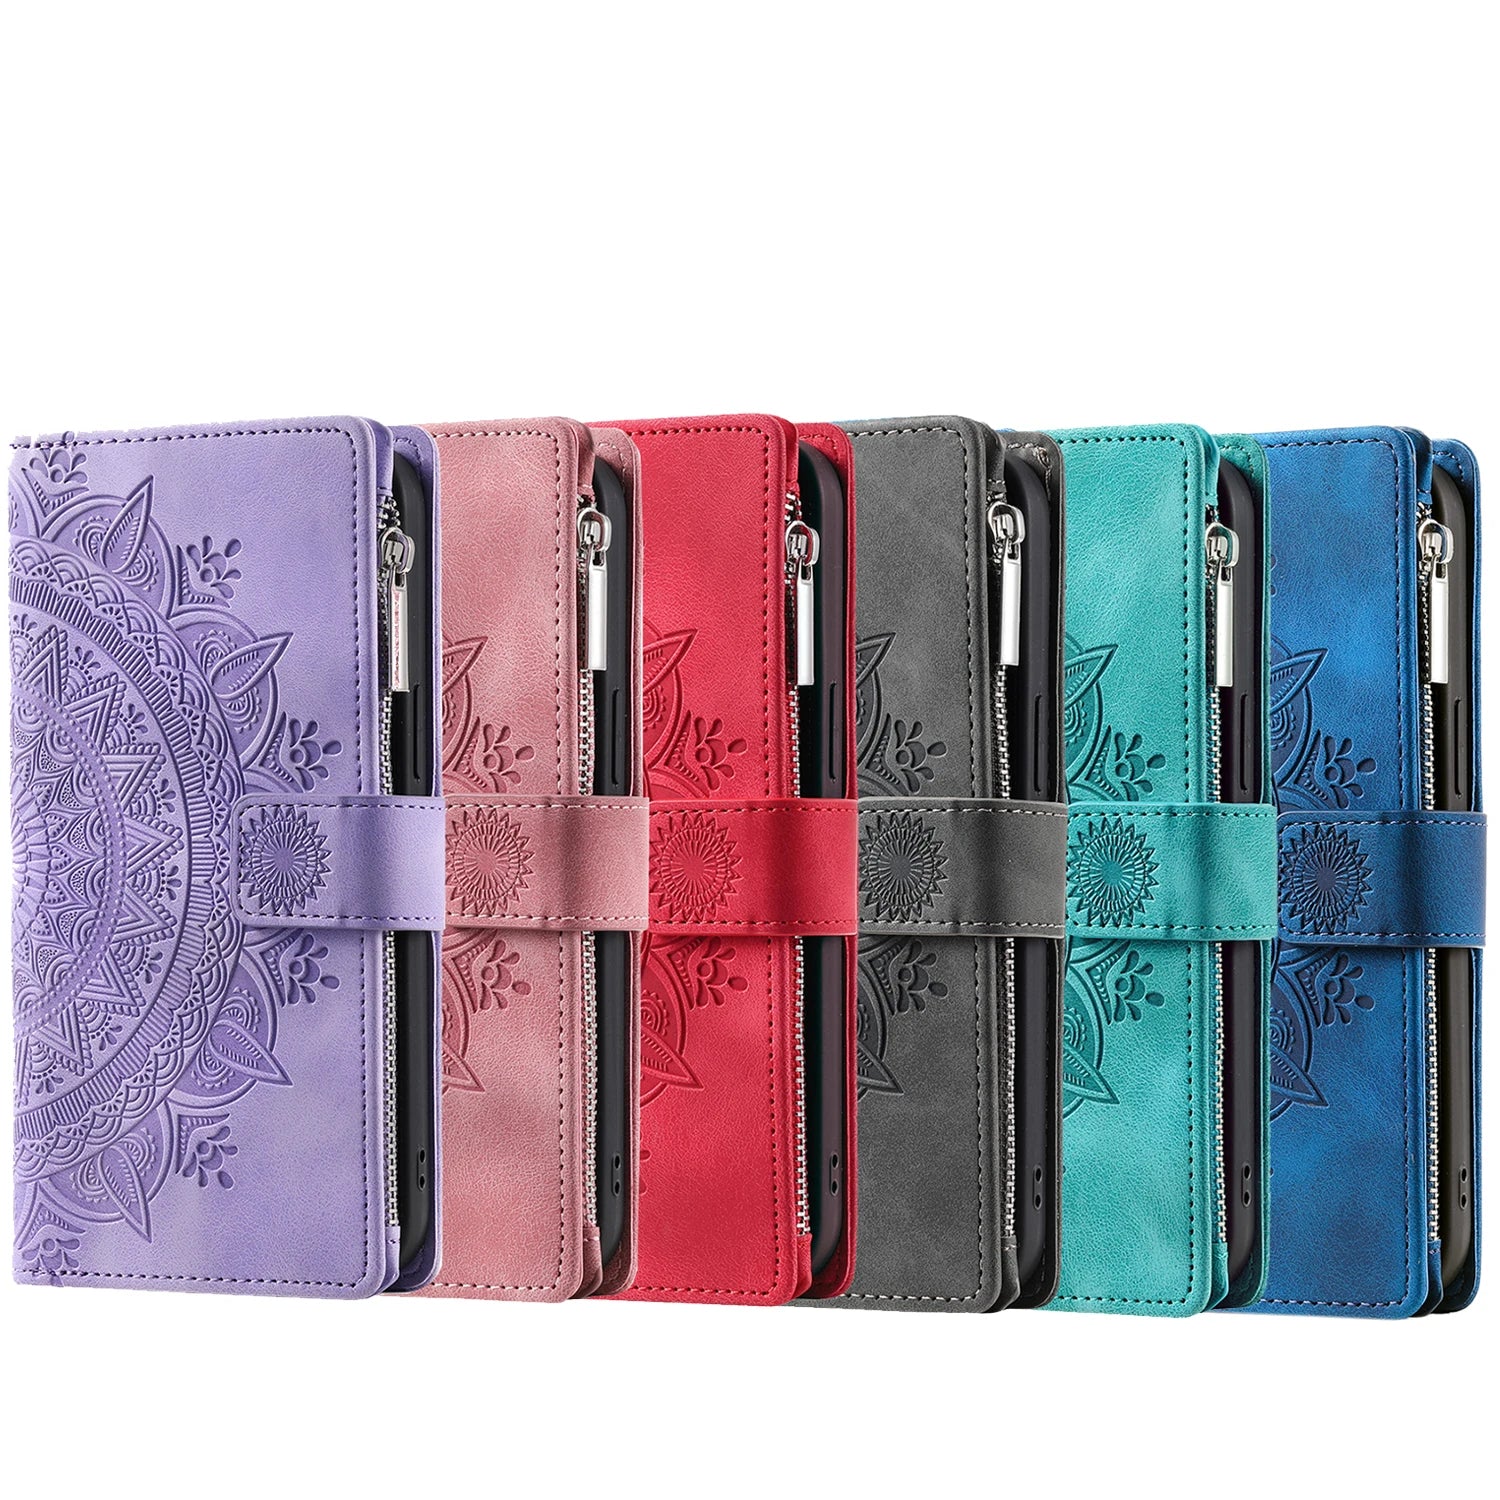 Card Wallet Embossing Leather Flip Galaxy Note and S Case - DealJustDeal